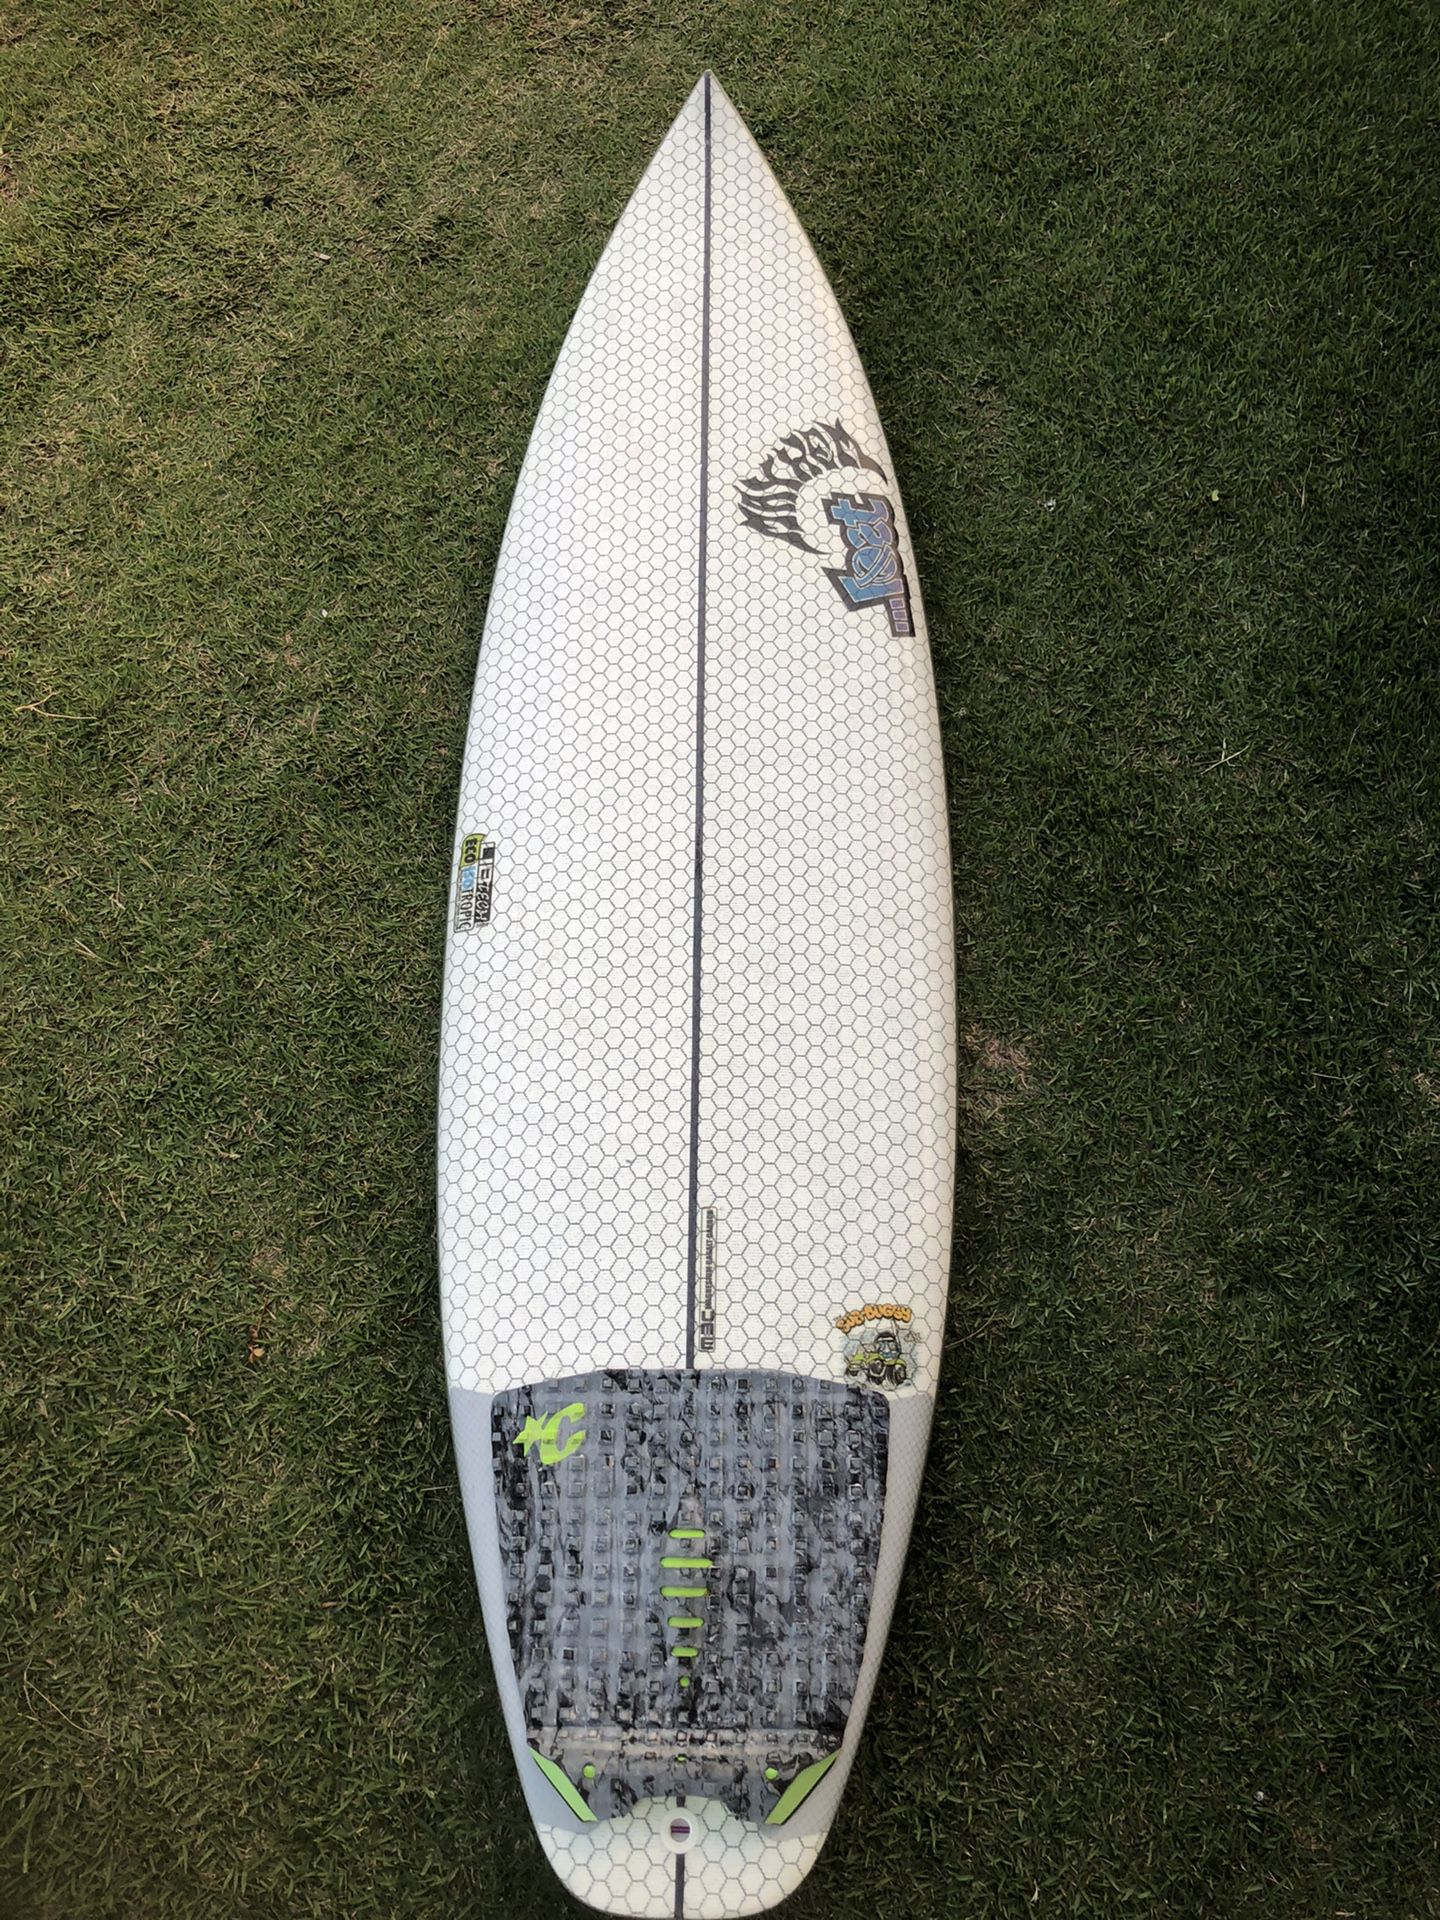 Sub-Buggy 5’11/19’’/2..32. 27 letters fairly new. OBO